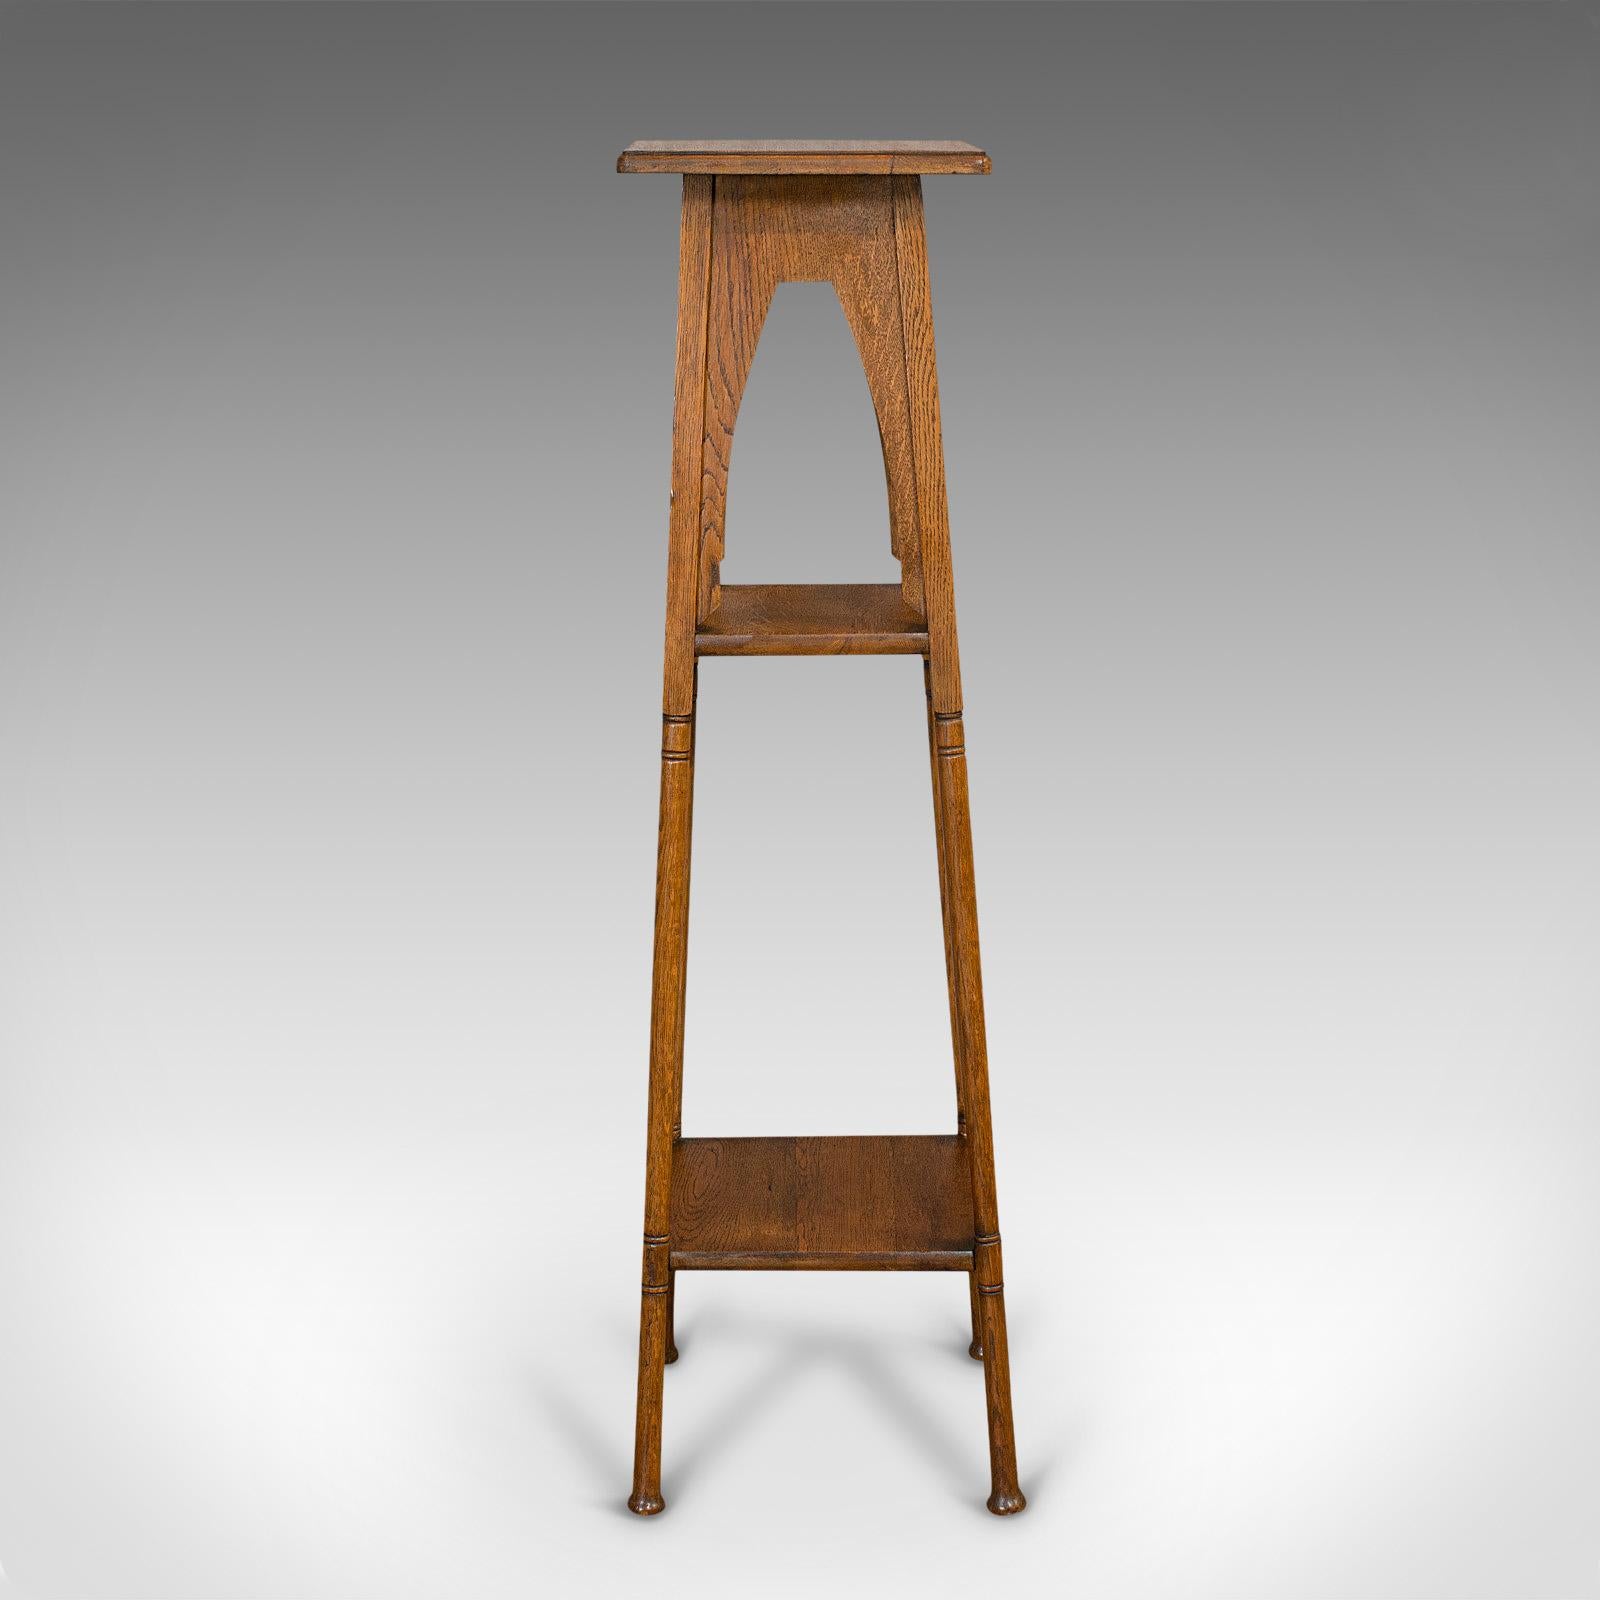 This is an antique jardinière. An English, oak plant stand with Liberty-esque Arts and Crafts taste, dating to the late 19th century, circa 1900.

A wonderfully presented stand
Displays a desirable aged patina
Select oak shows fine grain